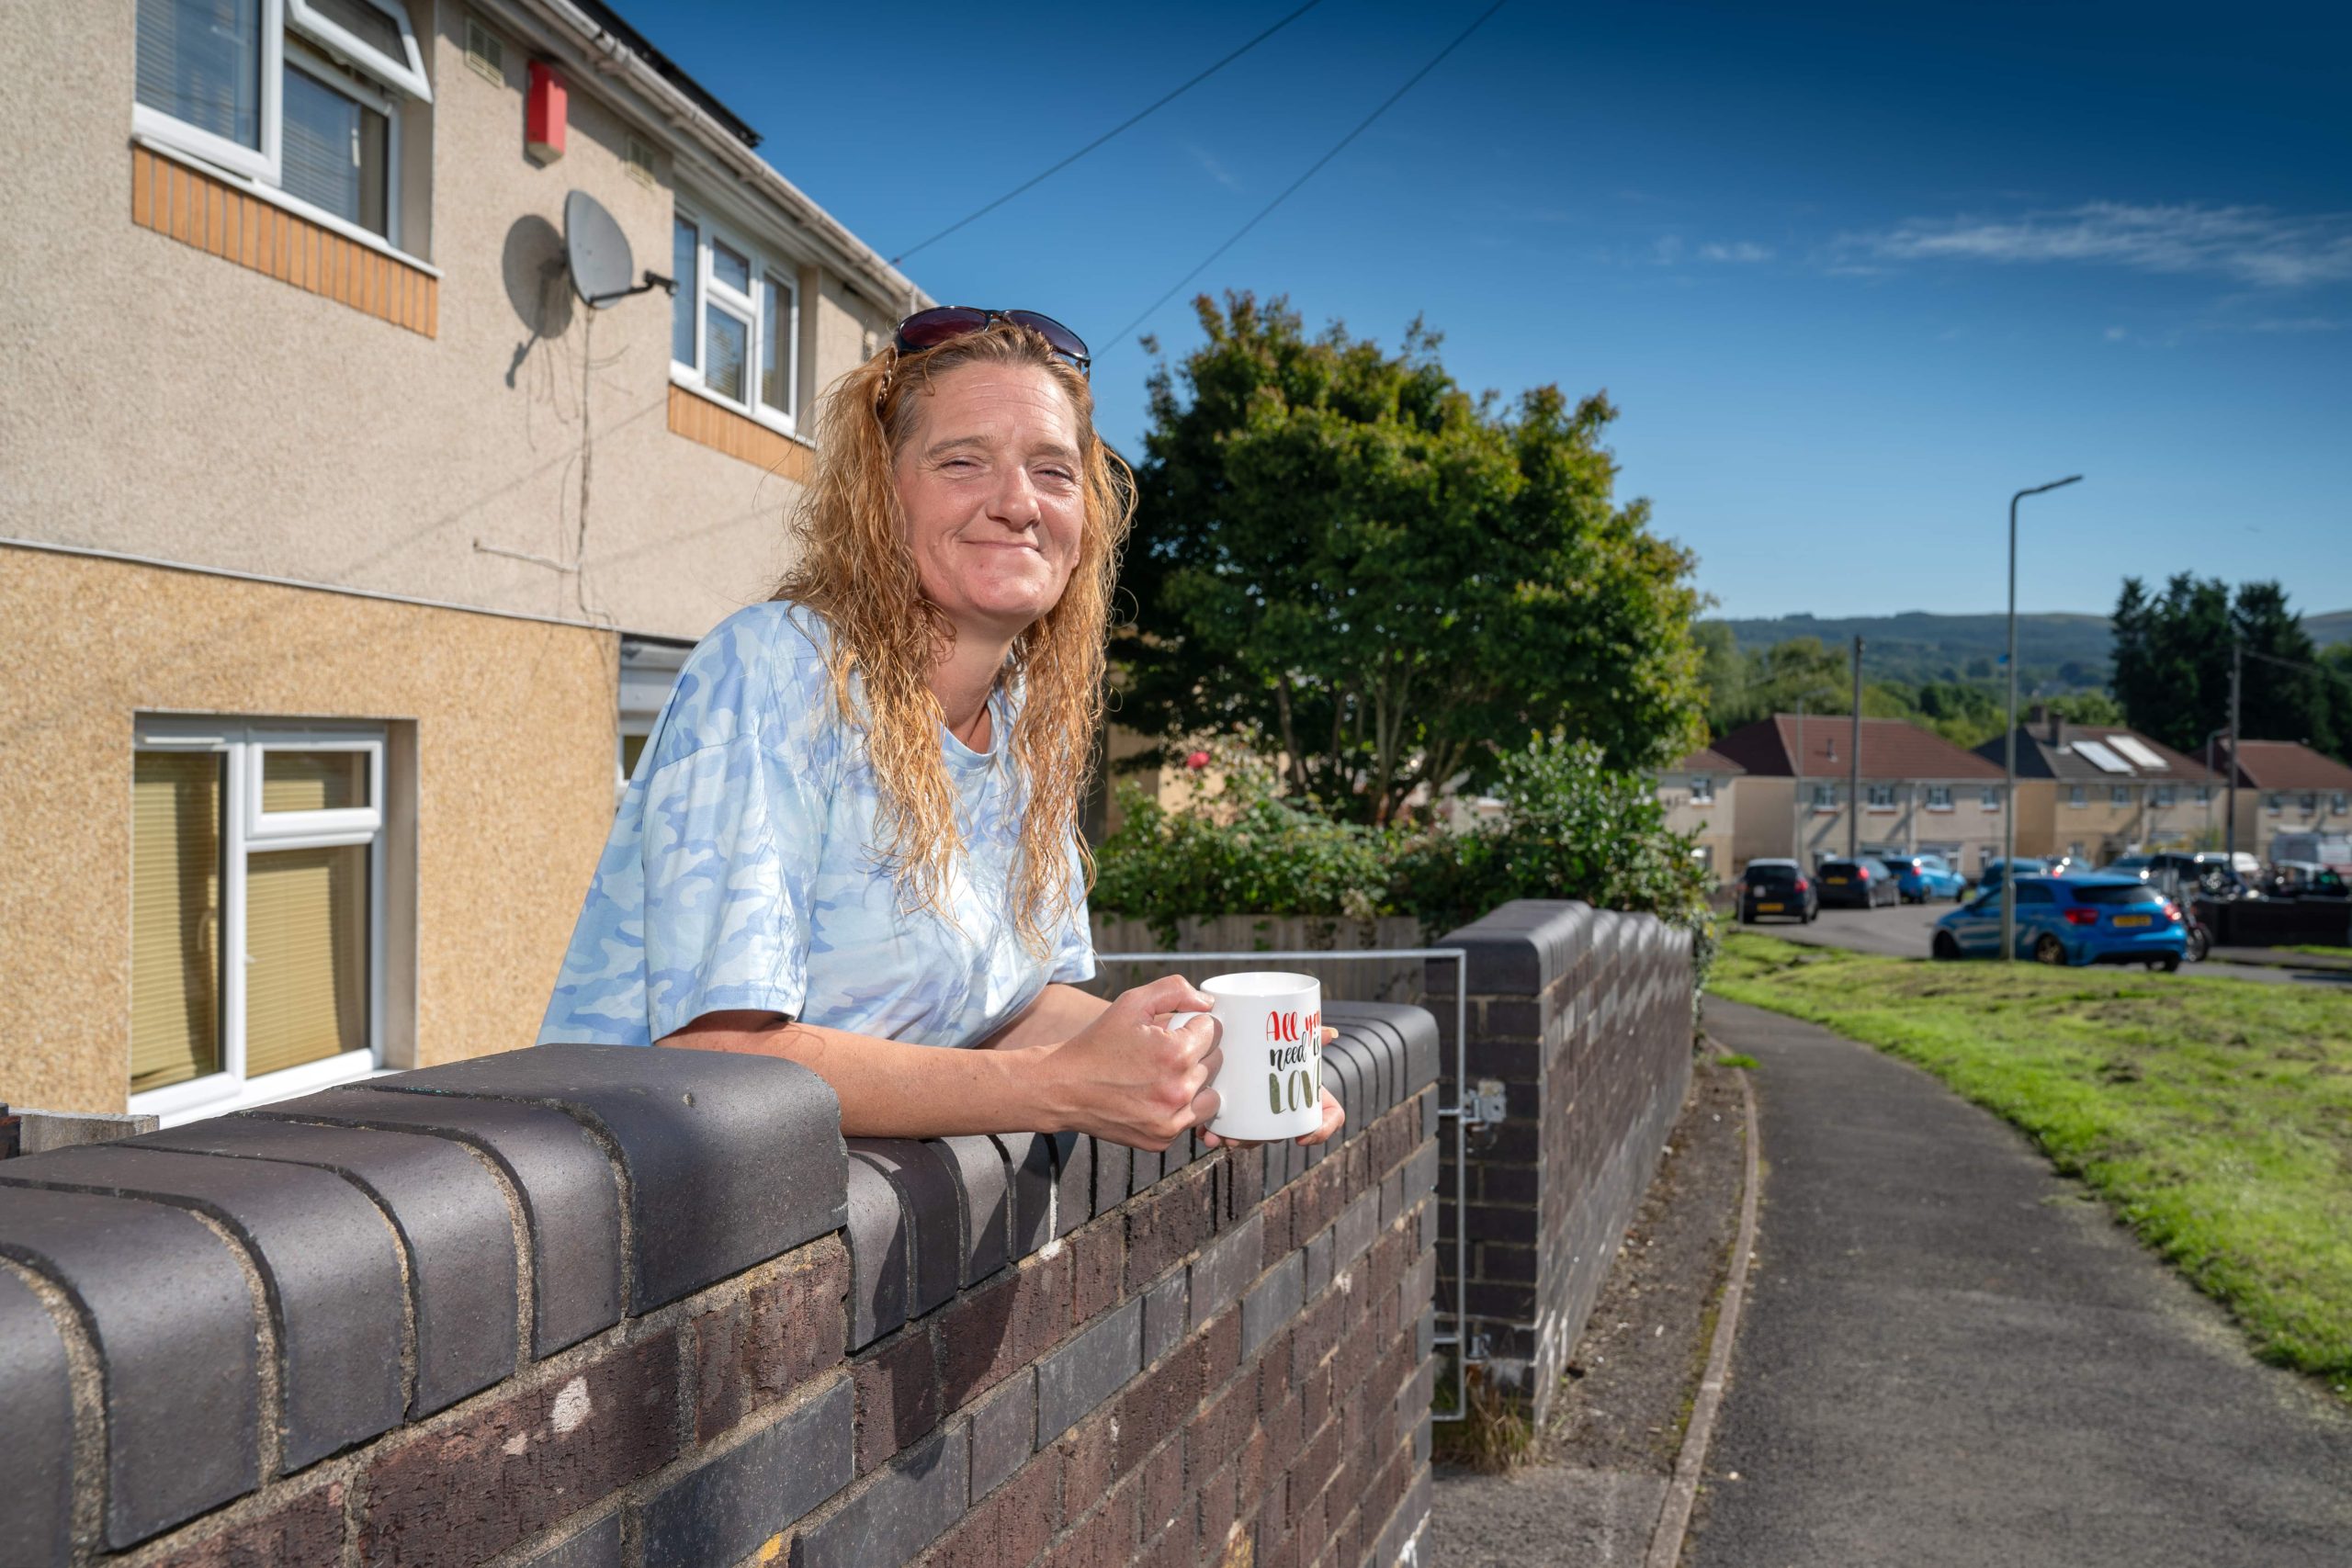 Trivallis Housing Landlord Wales A woman with long hair leaning on a fence, holding a mug, with a Trivallis residential street in the background.